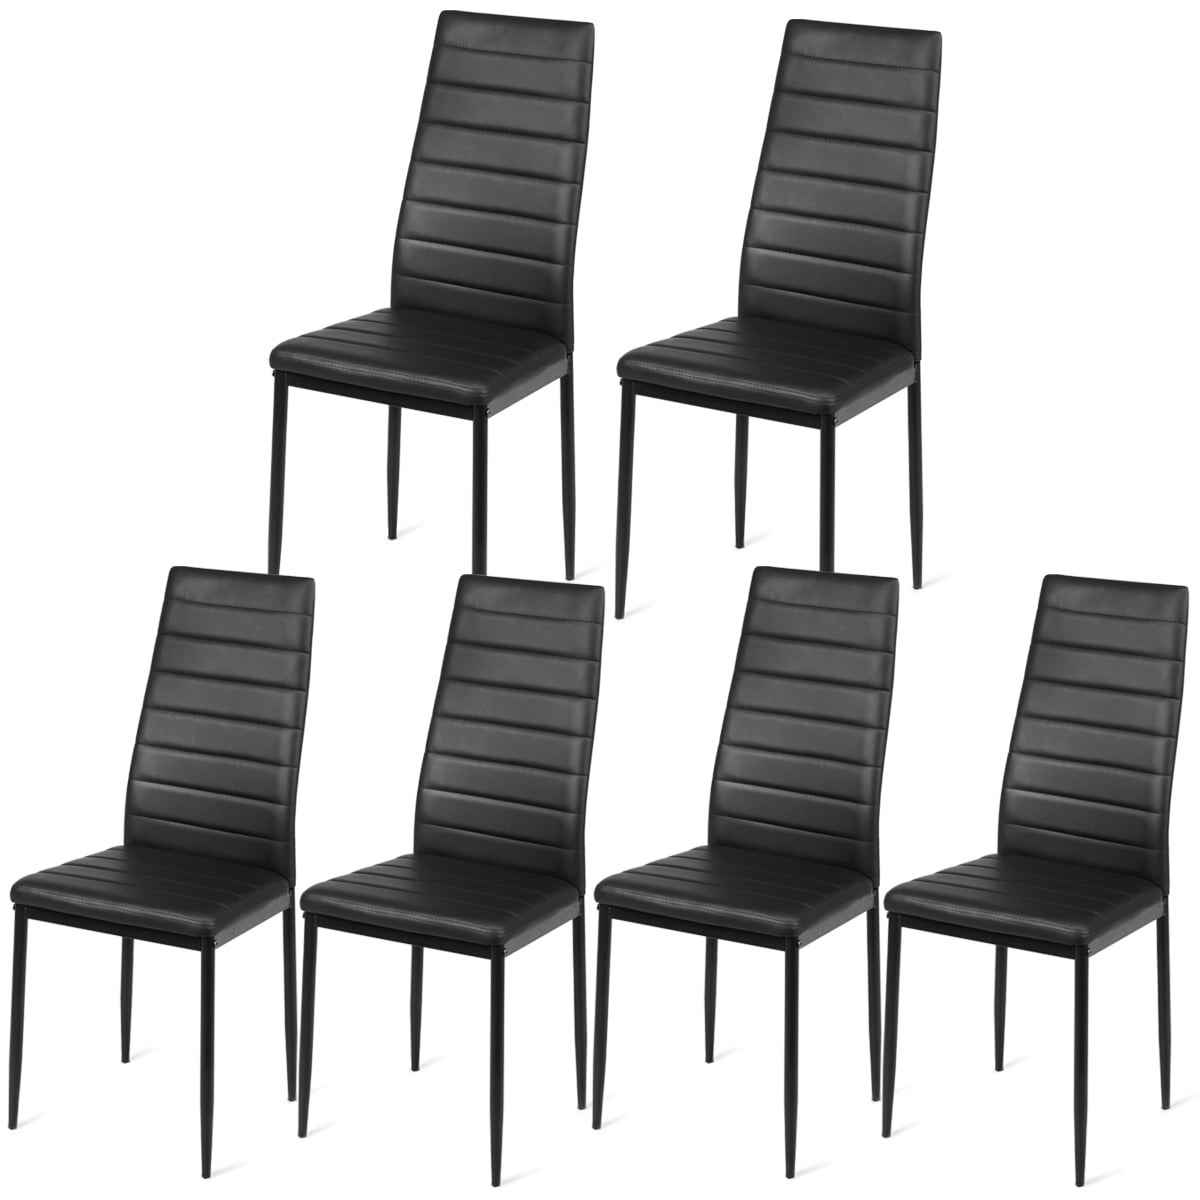 Details about   Set of 6 PU Leather Dining Side Chairs Elegant Design High Backrest Home office 